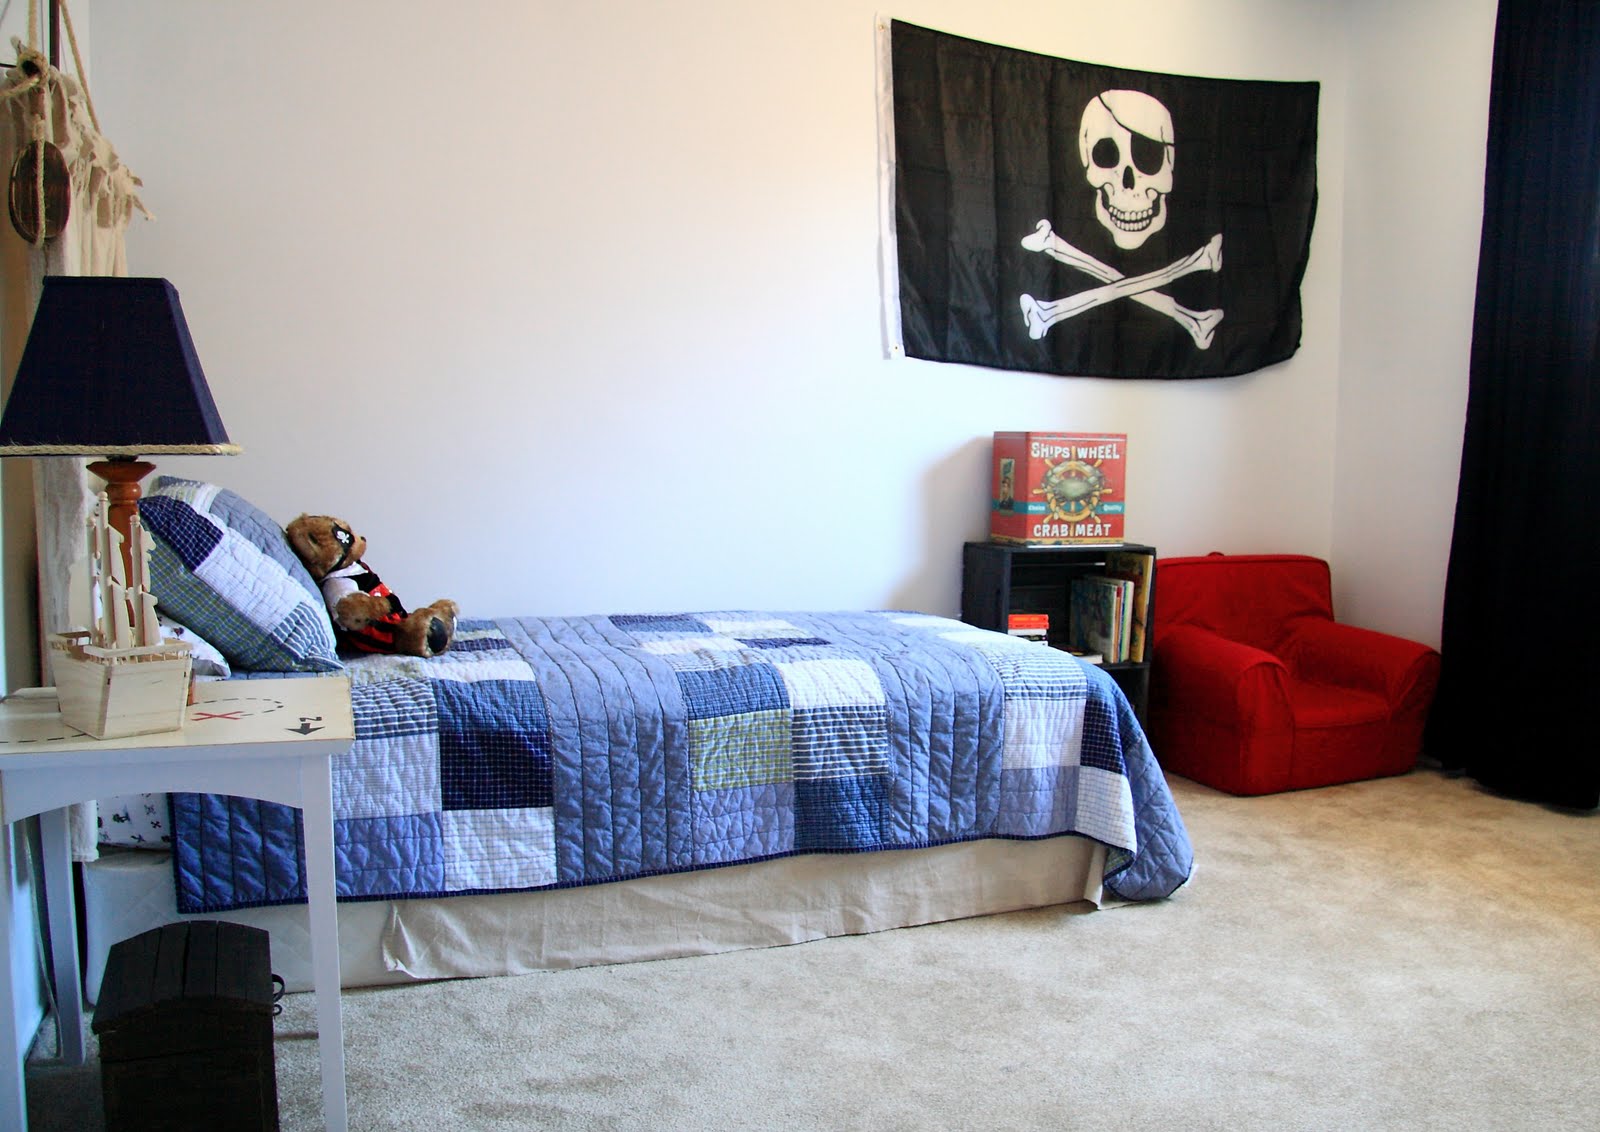 Boys Room With Excellent Boys Room Paint Ideas With Pirates Design Furnished With Single Bed And Table On Nightstand Completed With Red Chair Beside Black Shelf Kids Room Boys Room Paint Ideas With Simple Design